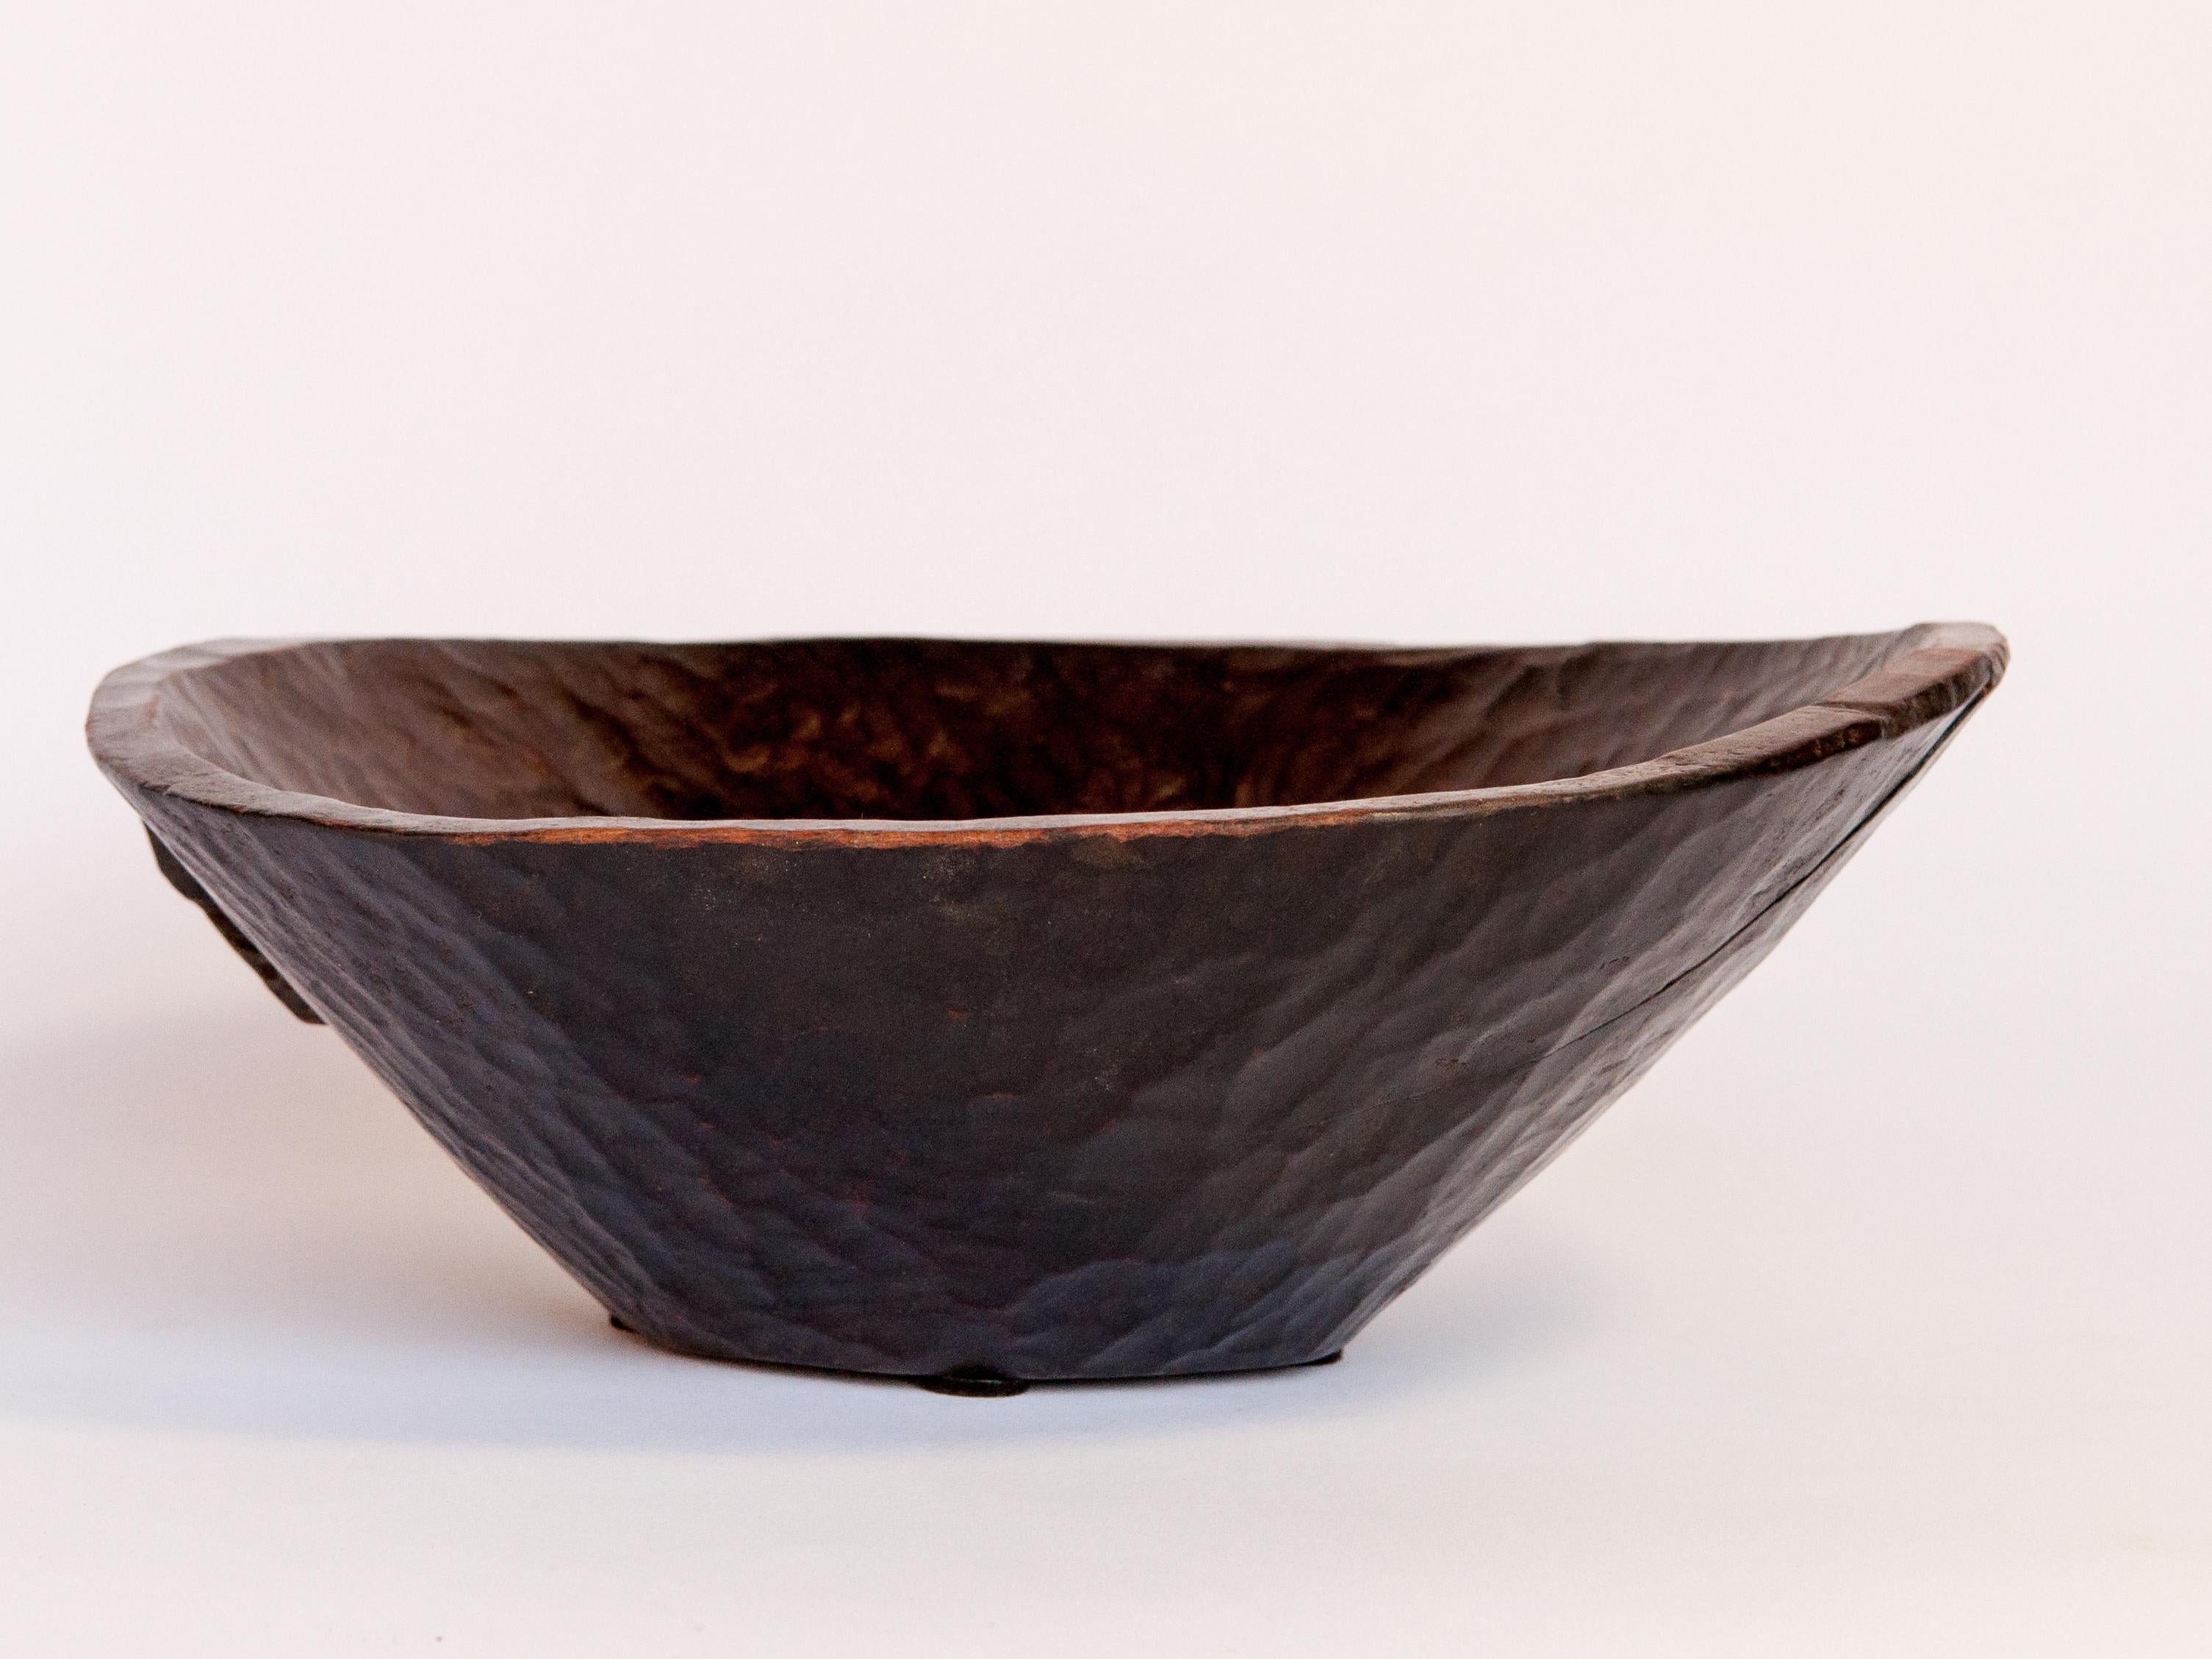 Hand-Carved Vintage Tribal Wooden Bowl from Ethiopia, Mid-20th Century